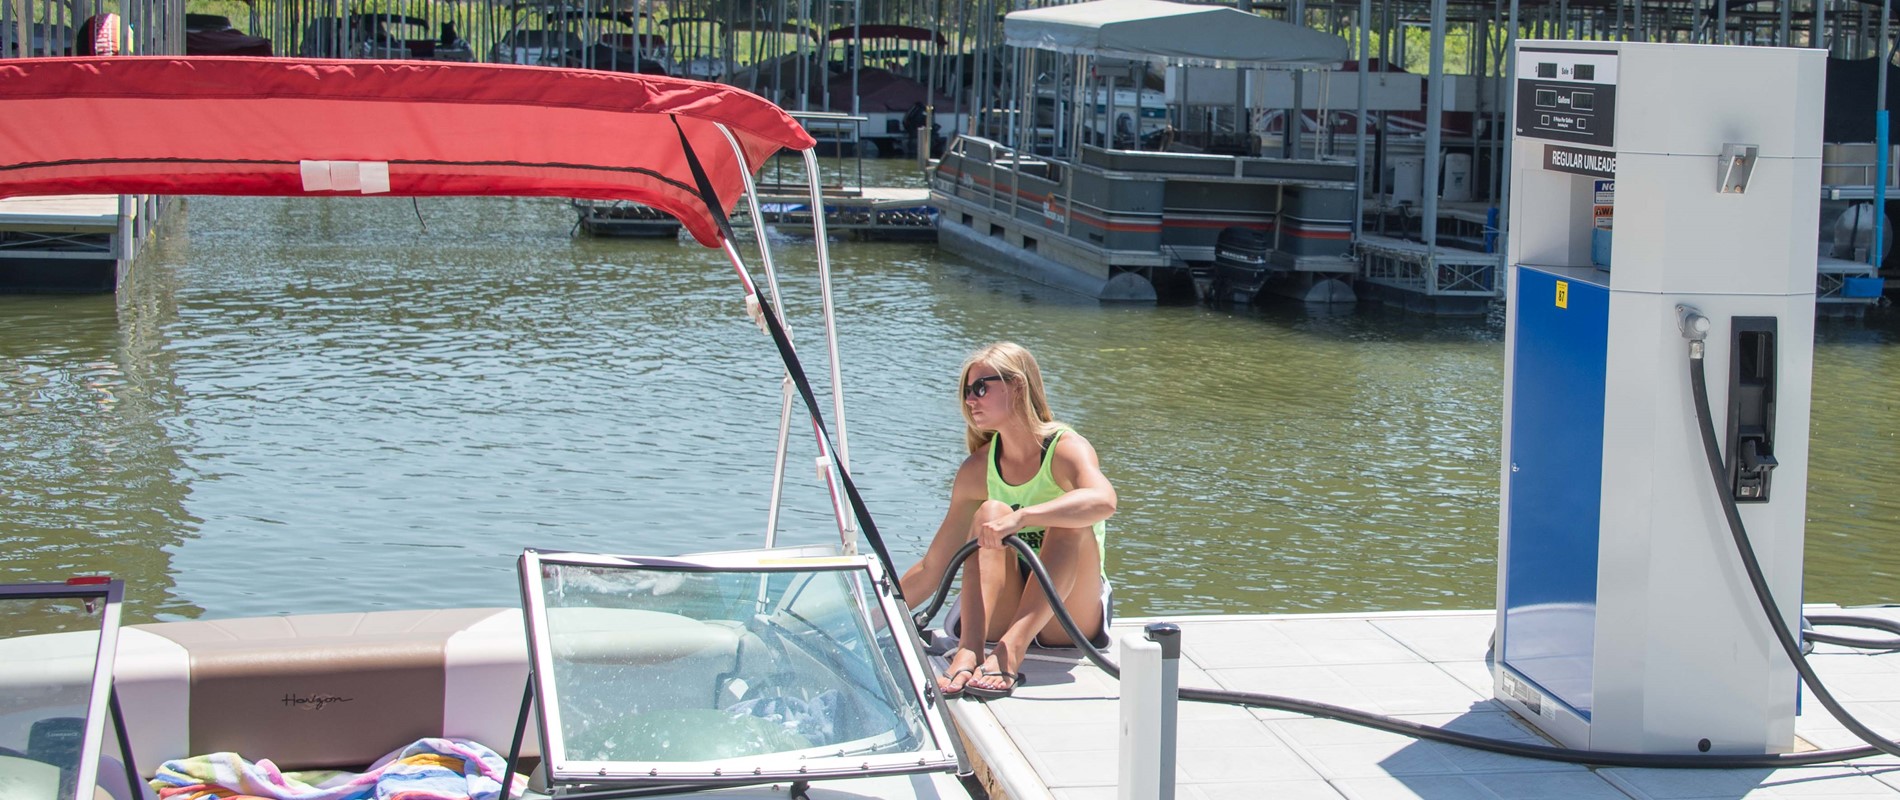 woman filling boat with gas on dock